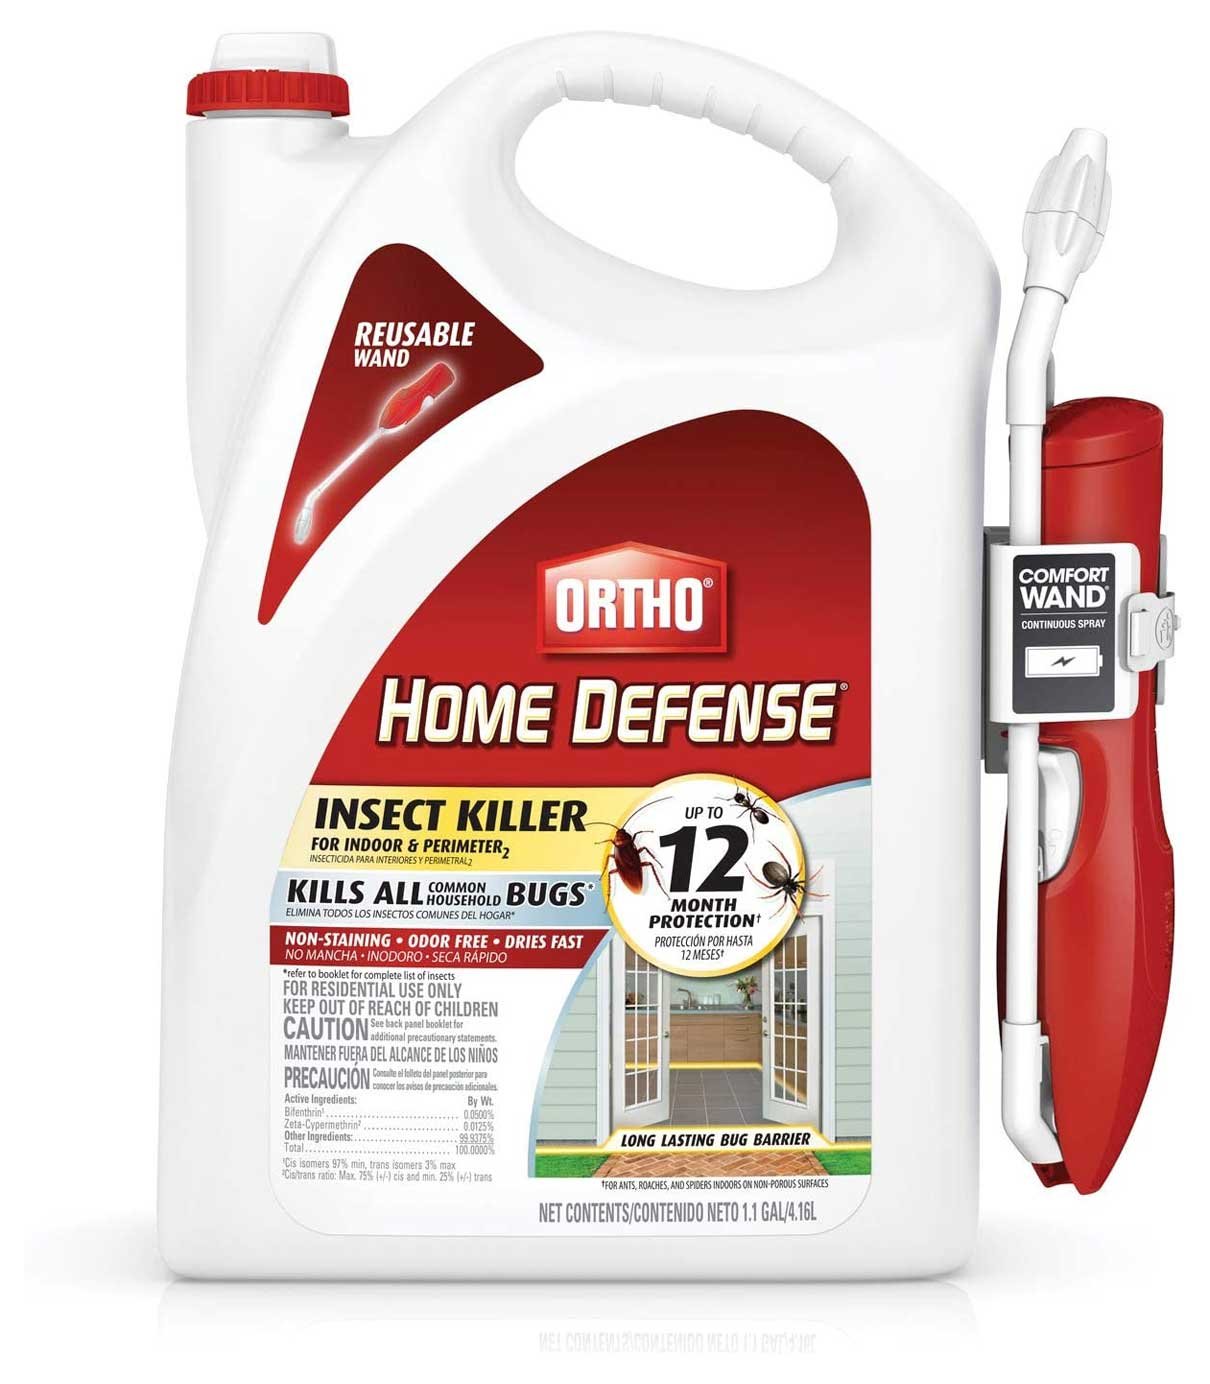 Ortho Home Defense Insect Killer with Comfort Wand- Best Cockroach Repellent